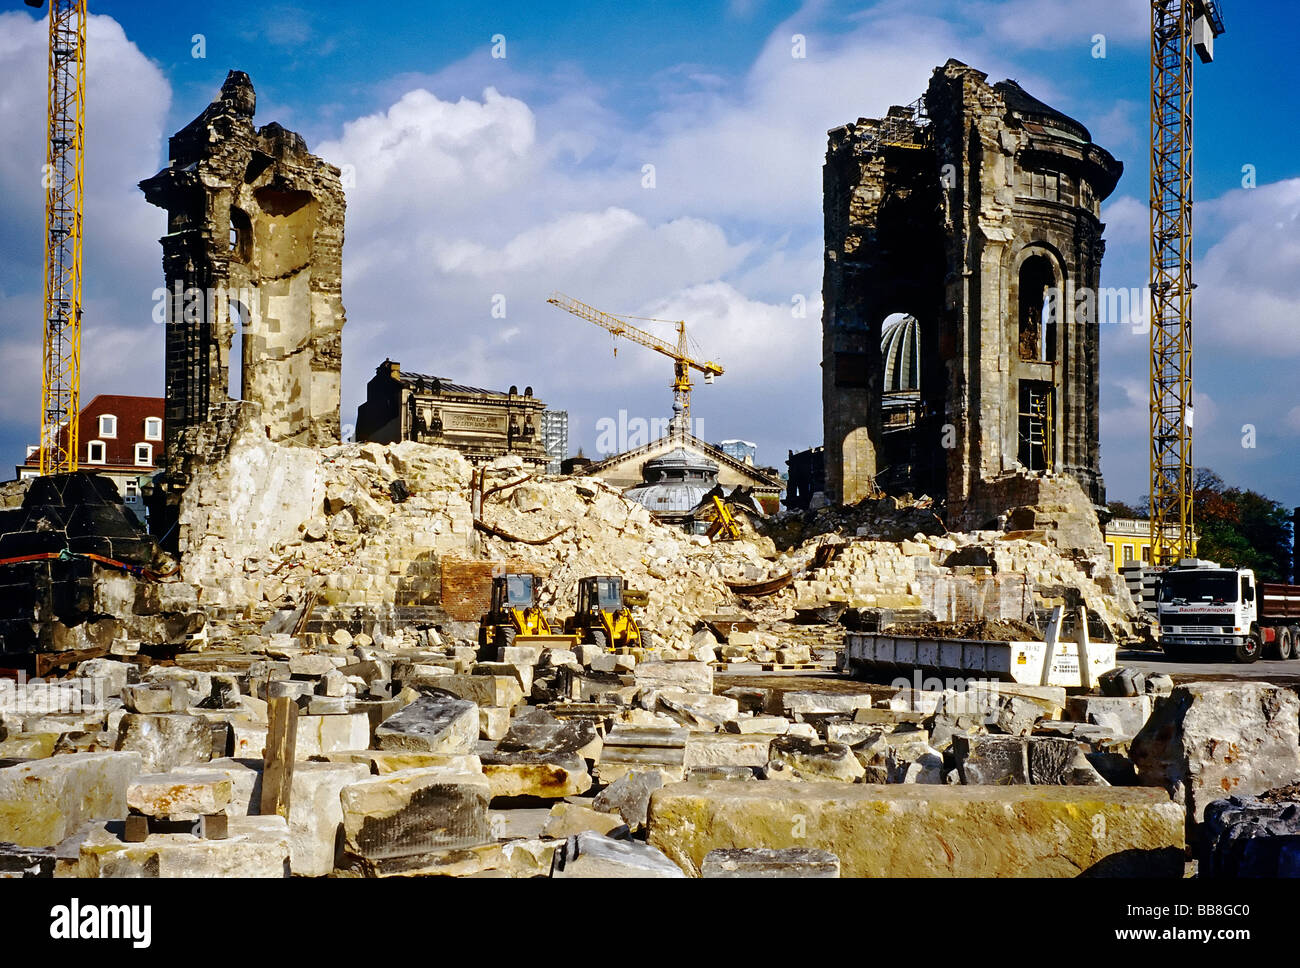 Ruin of Dresden Frauenkirche, condition in 1996, disposal site with construction vehicles, Dresden, Saxony, Germany, Europe Stock Photo